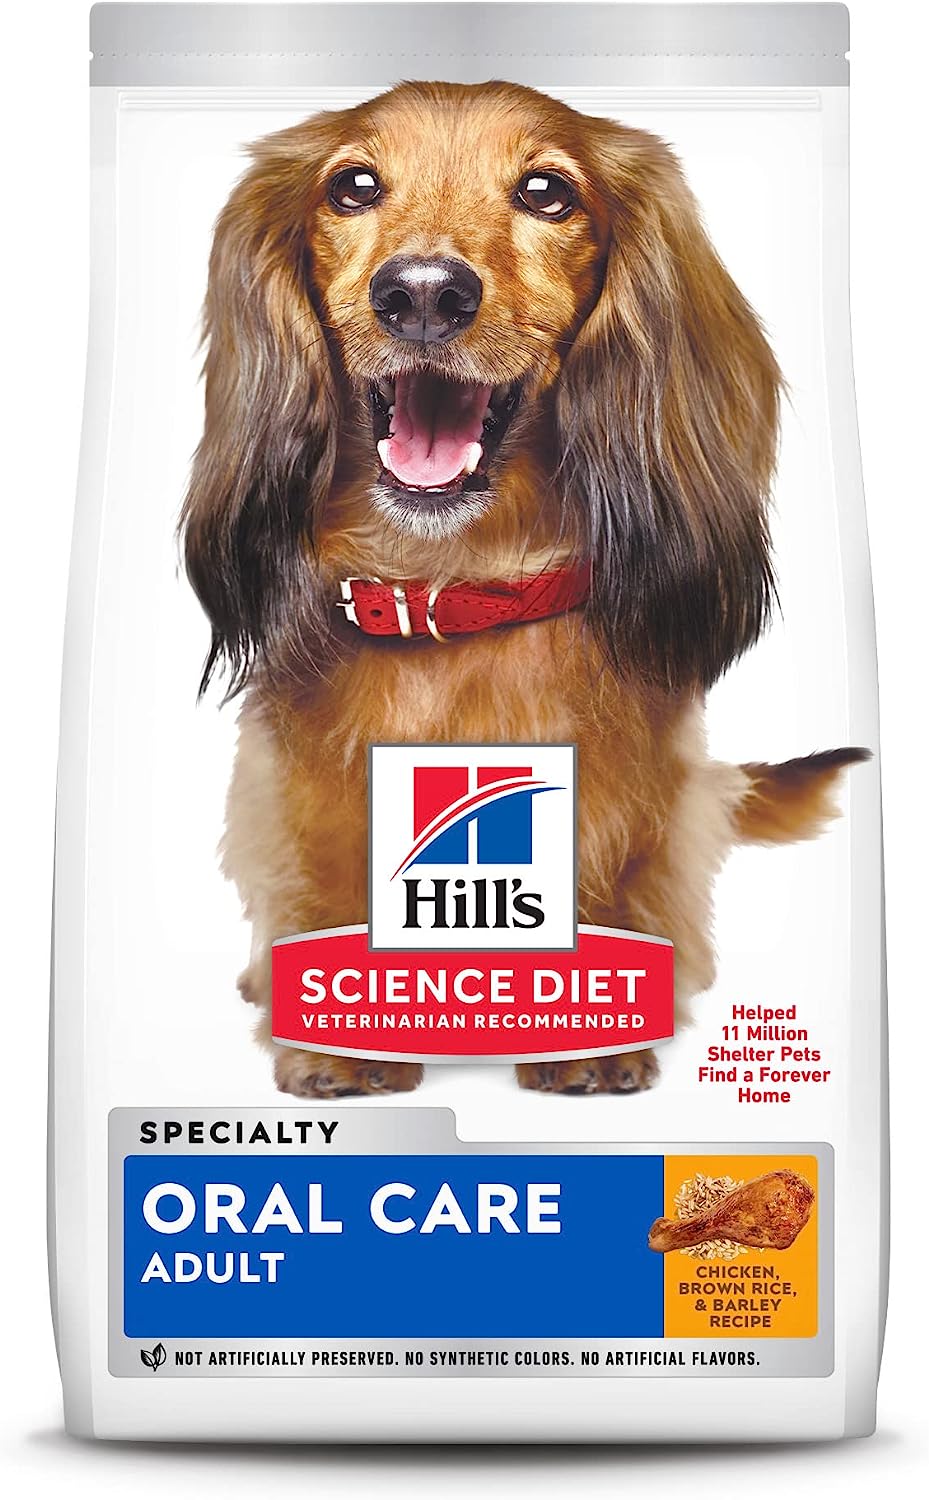 Hill’s Science Diet Adult Oral Care Chicken, Rice & Barley Recipe Dry Dog Food – Gallery Image 1